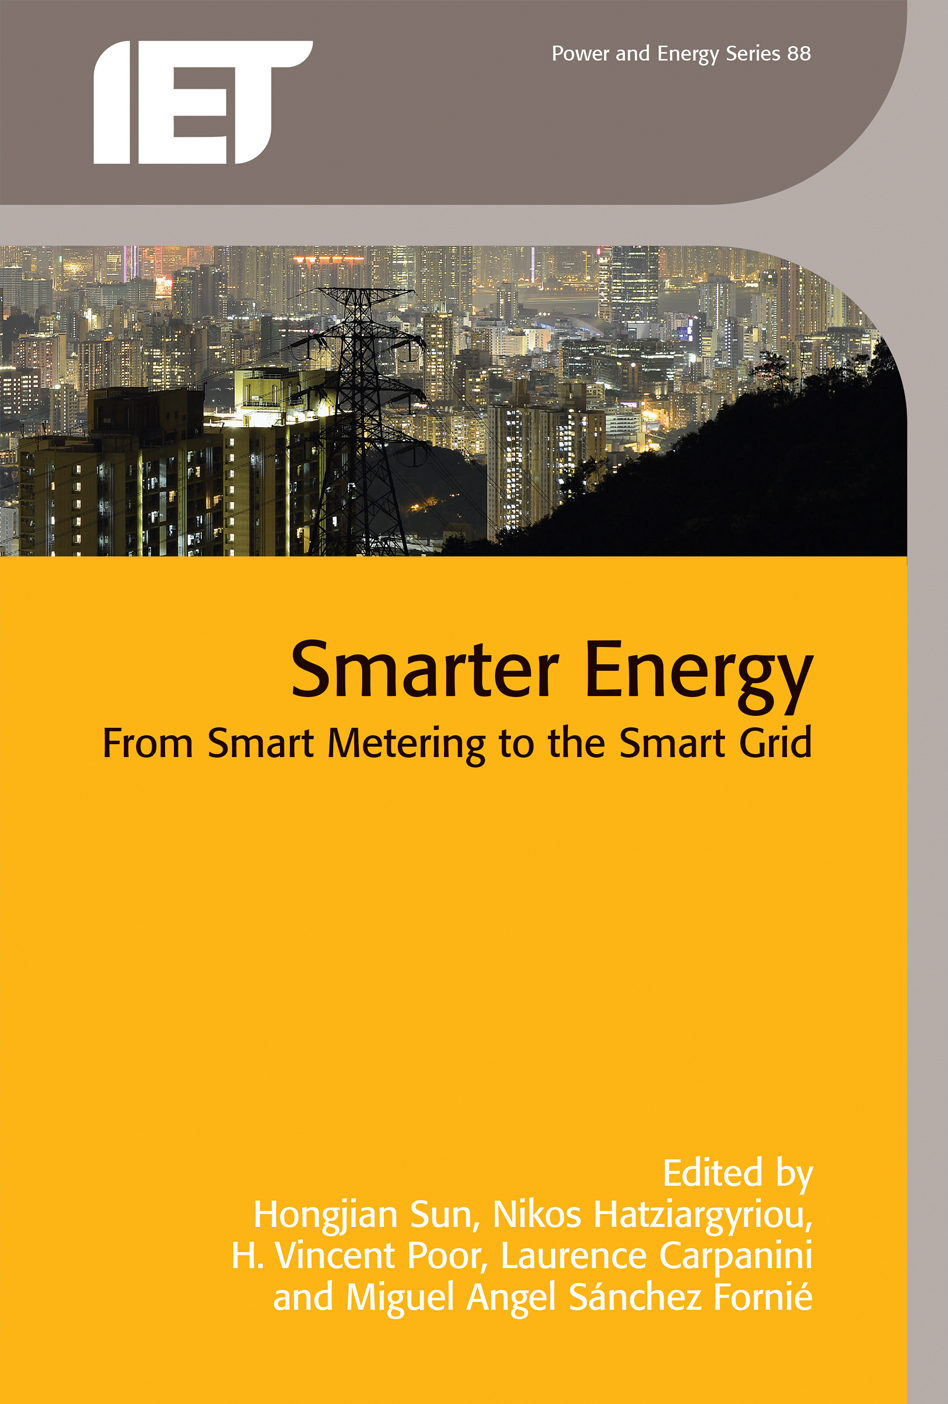 Smarter Energy, From smart metering to the smart grid